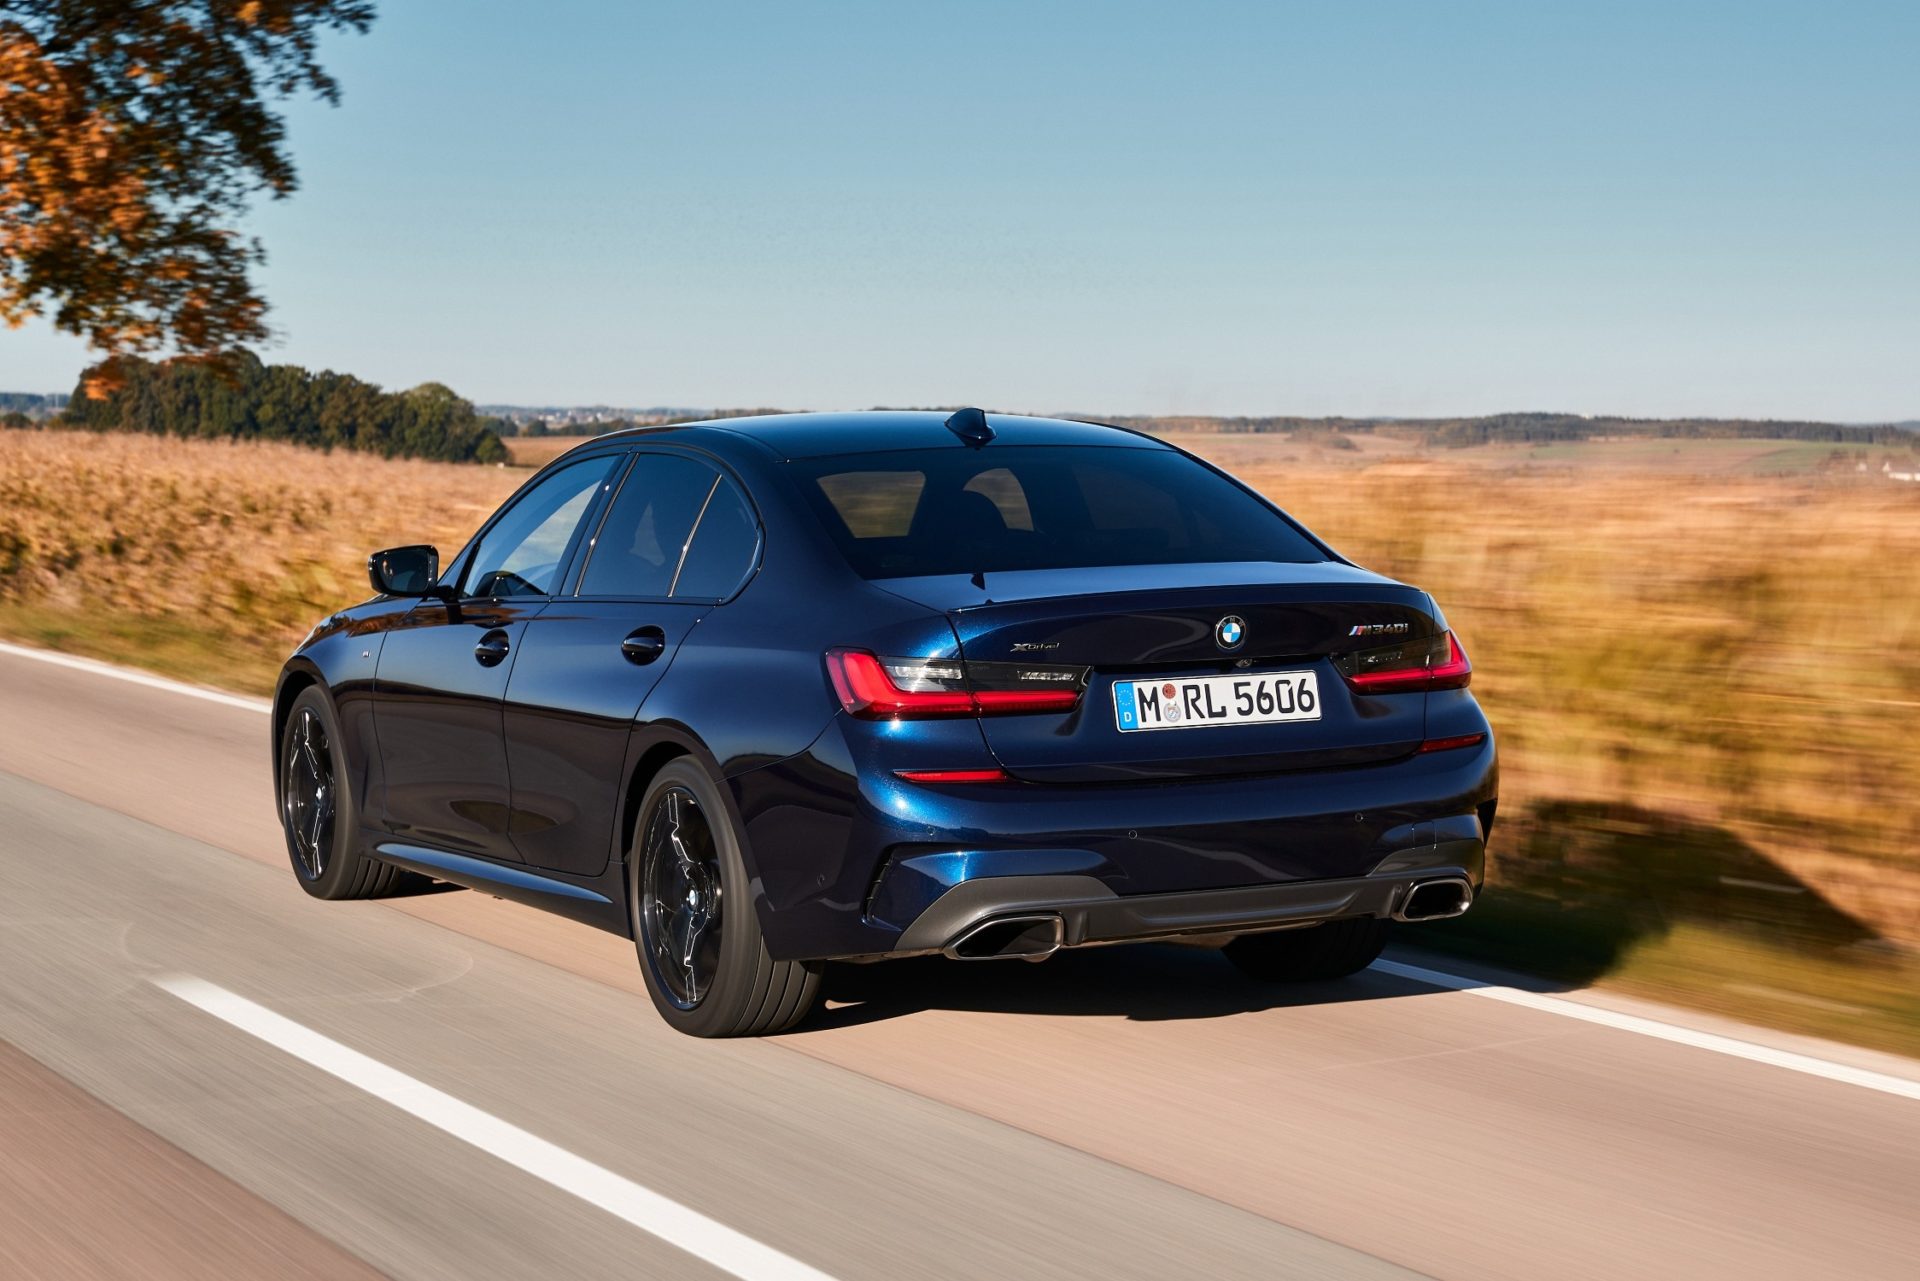 Rejoice, Second Lot Of BMW M340i Coming To India Soon - The Indian Wire